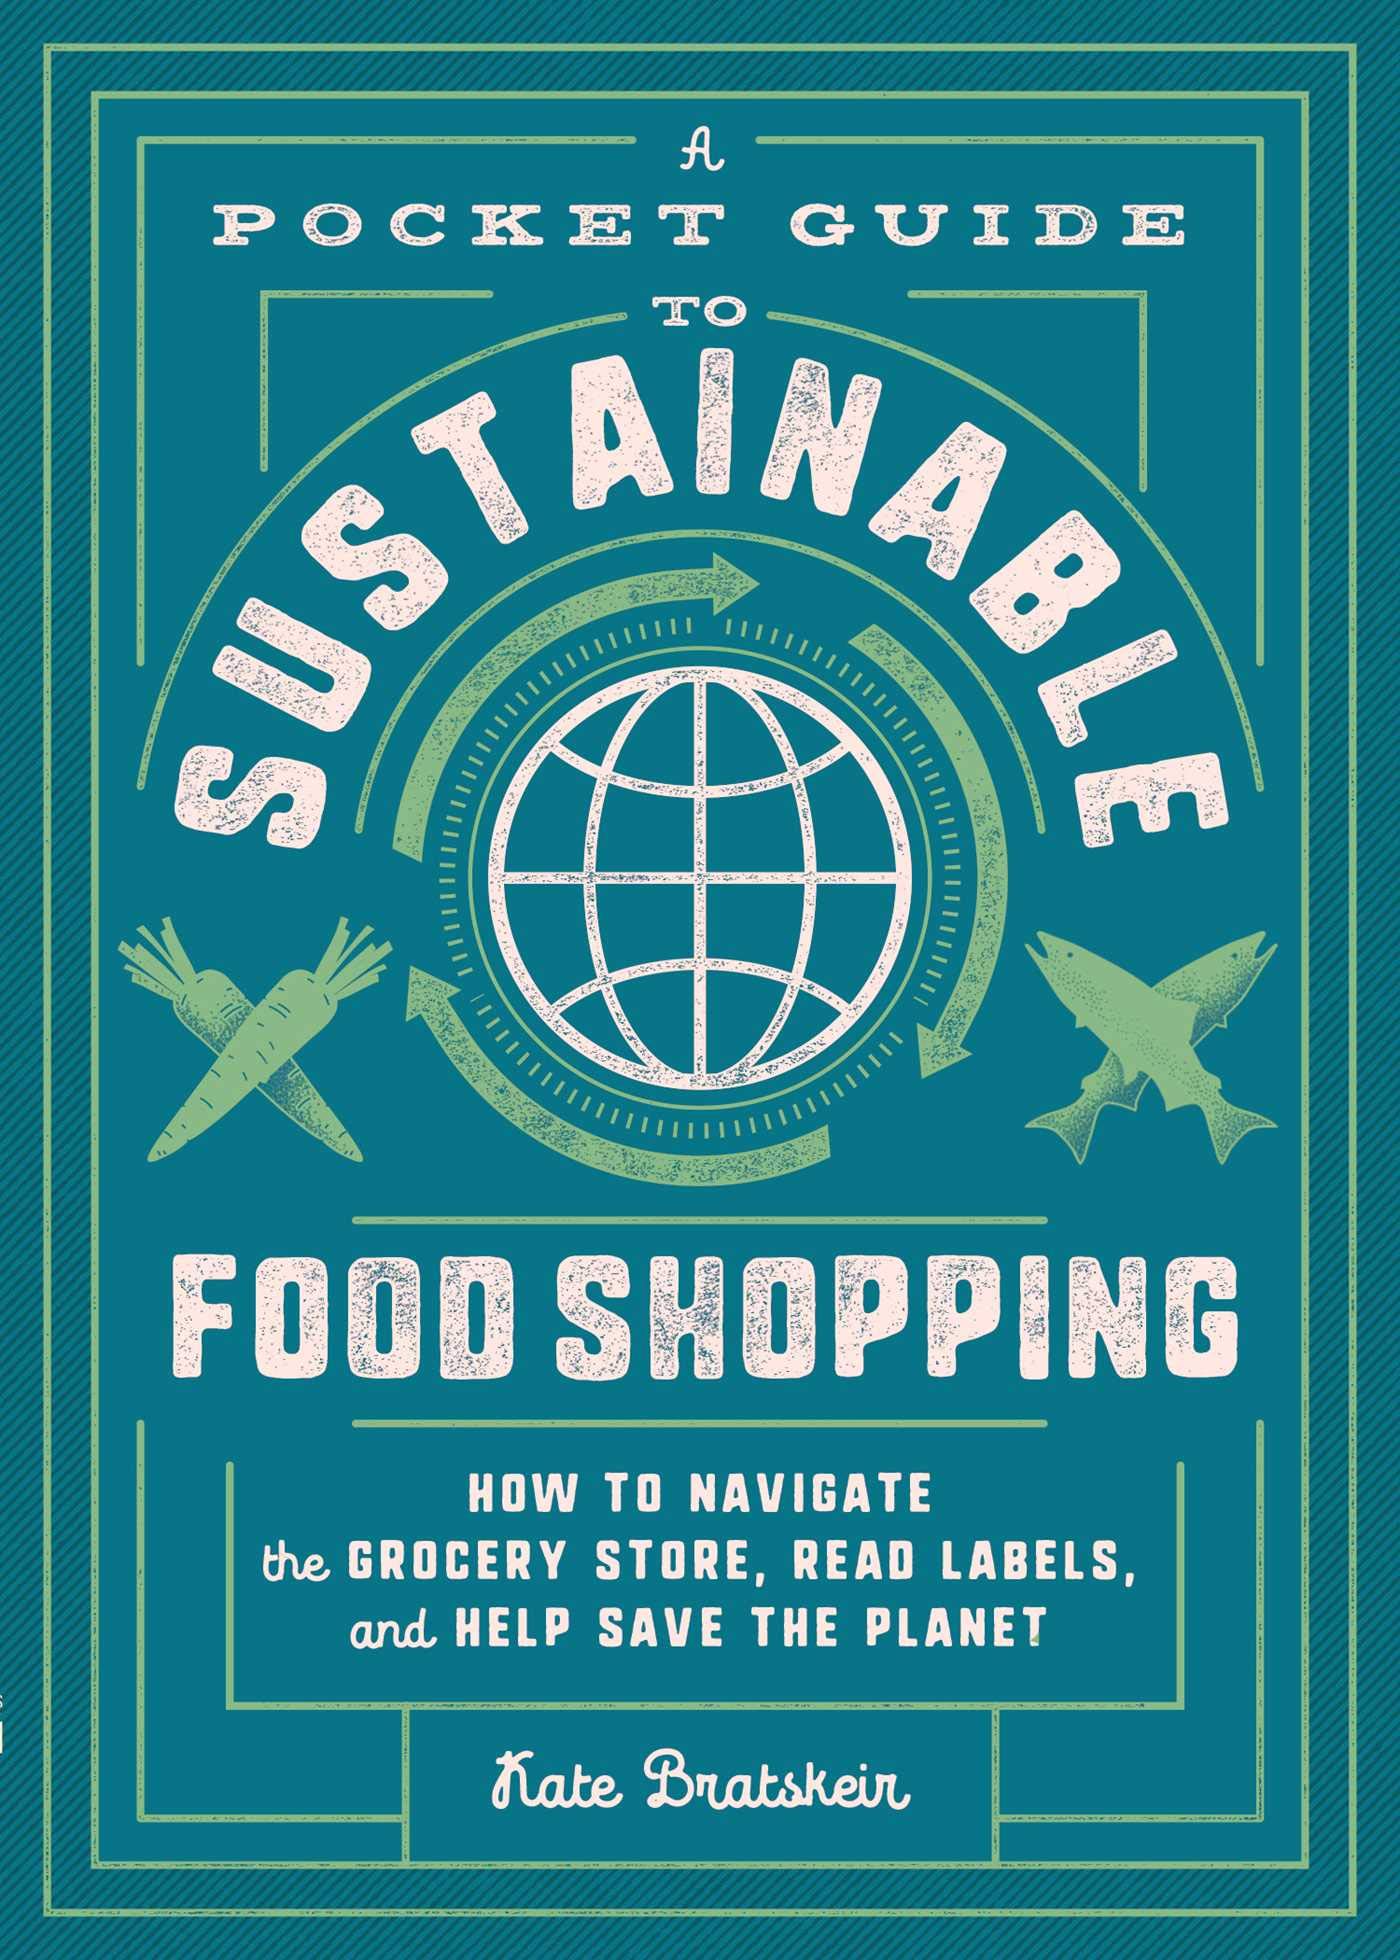 Image for "Sustainable Food Shopping"